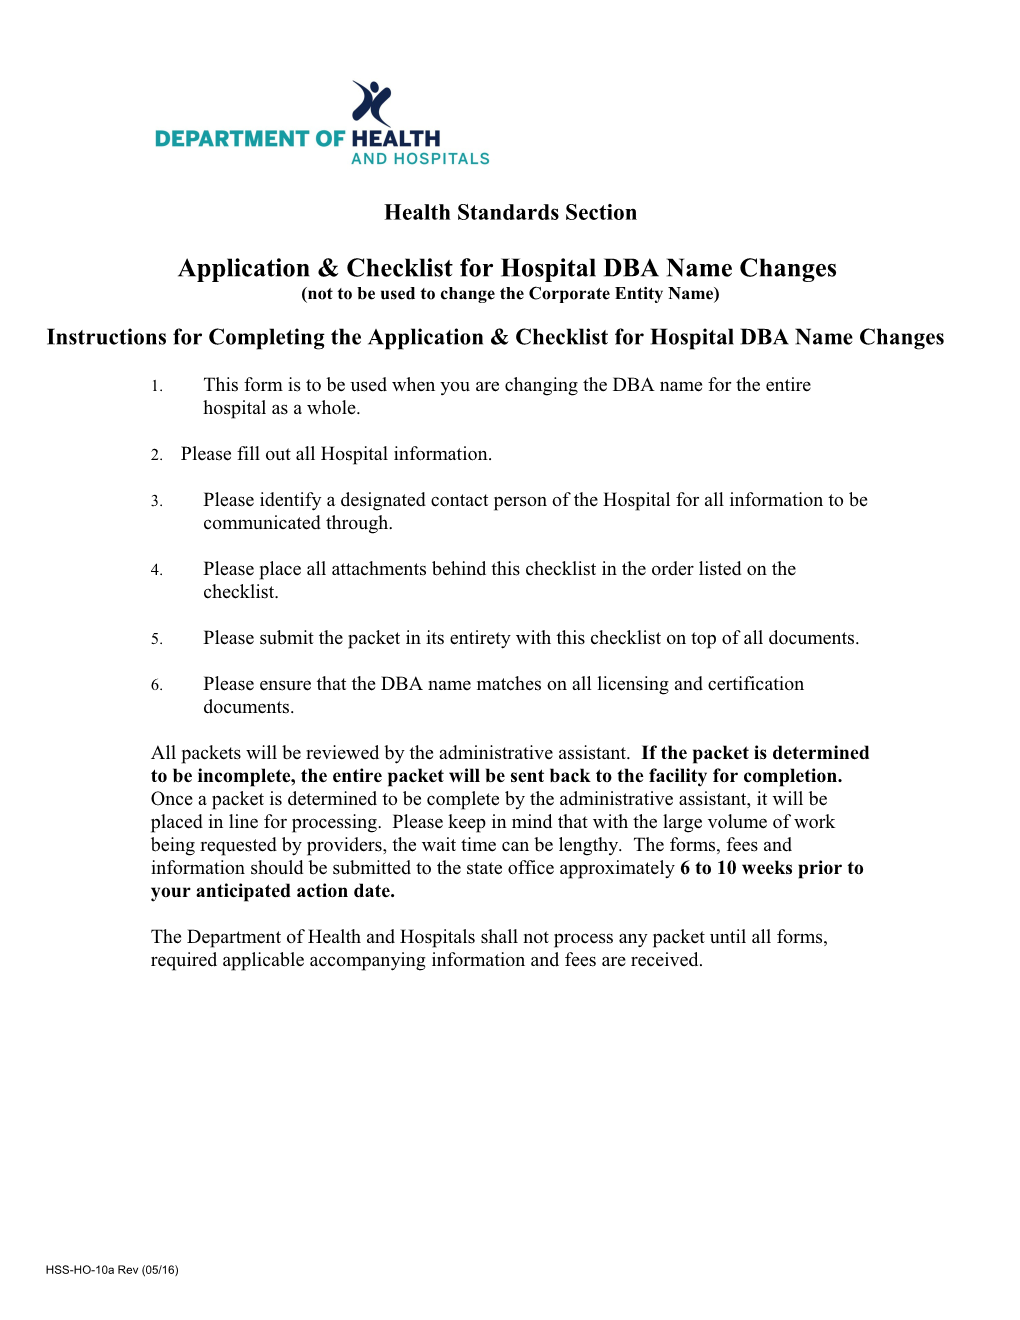 Application & Checklist for Hospitaldba Name Changes